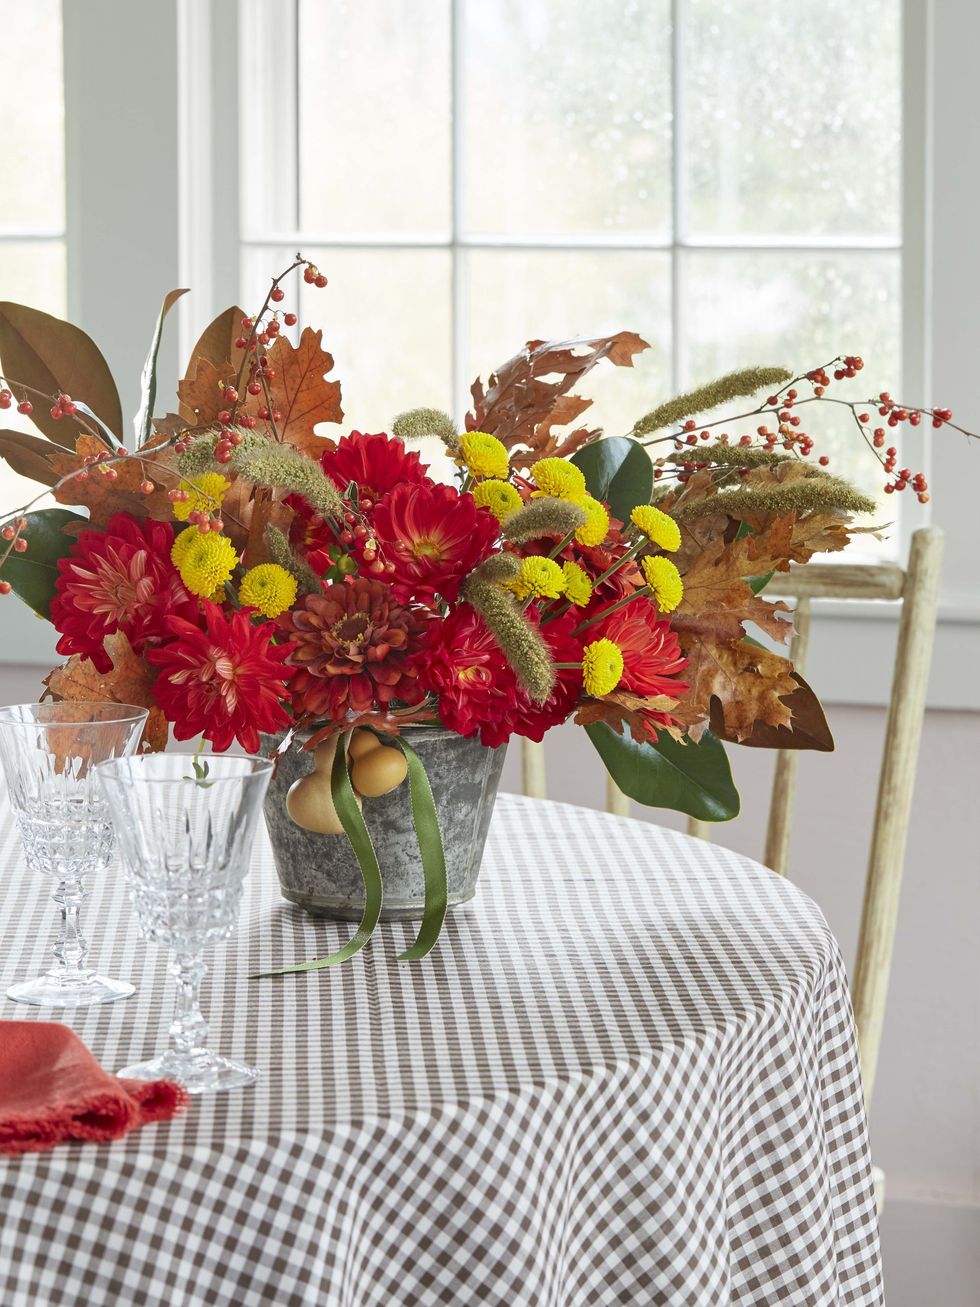 45 Fall Decorating Ideas Using Dried Leaves, Flowers And Fruits -  Shelterness